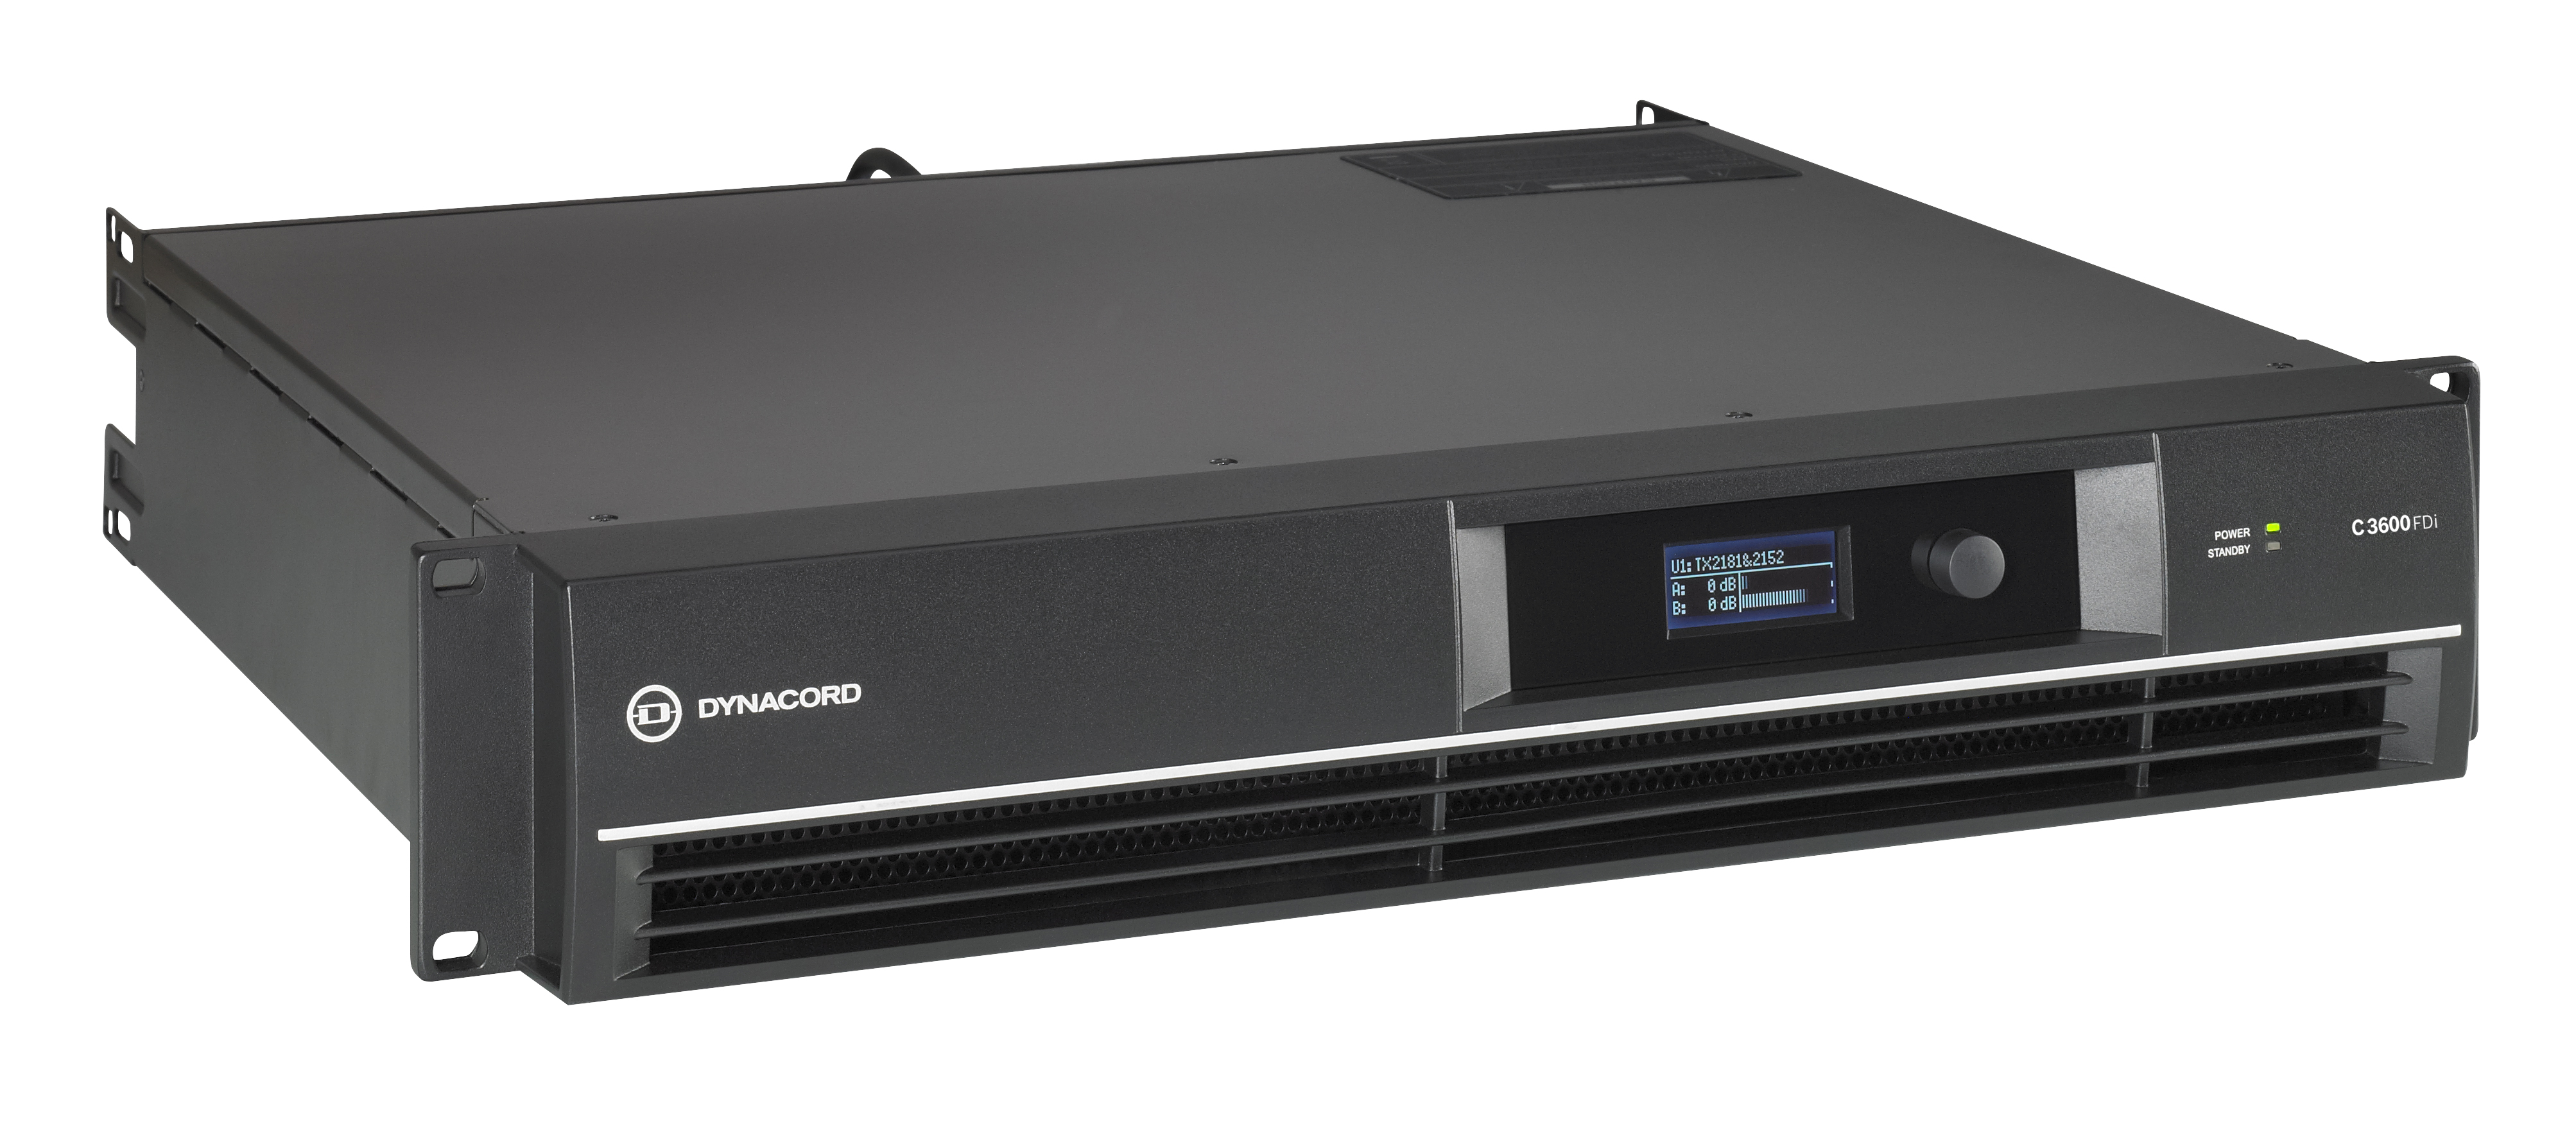 Dynacord launches new power amplifiers globally